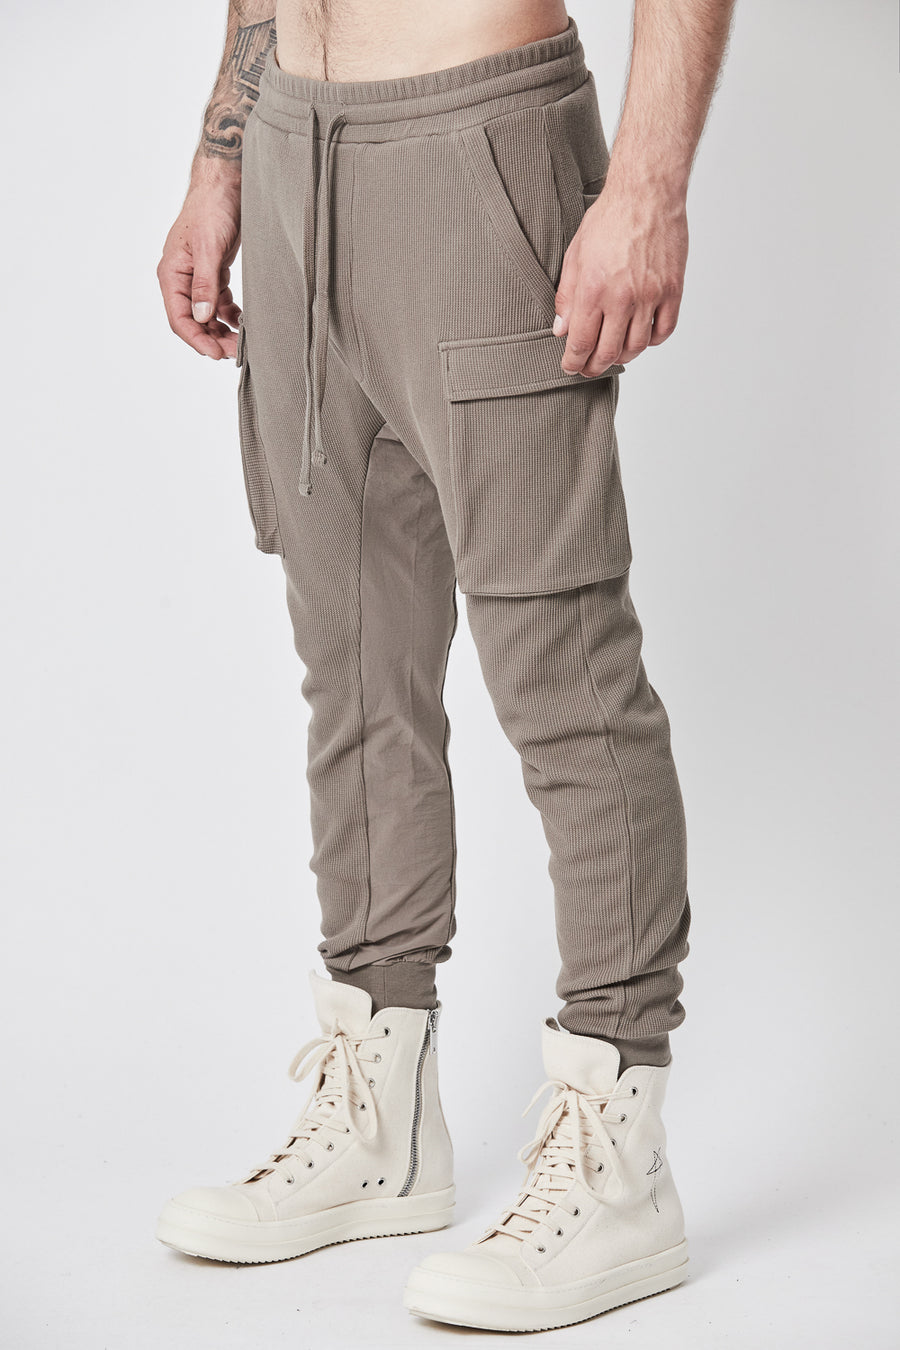 Buy the Thom Krom M ST 384 Sweatpants in Fossil at Intro. Spend £50 for free UK delivery. Official stockists. We ship worldwide.